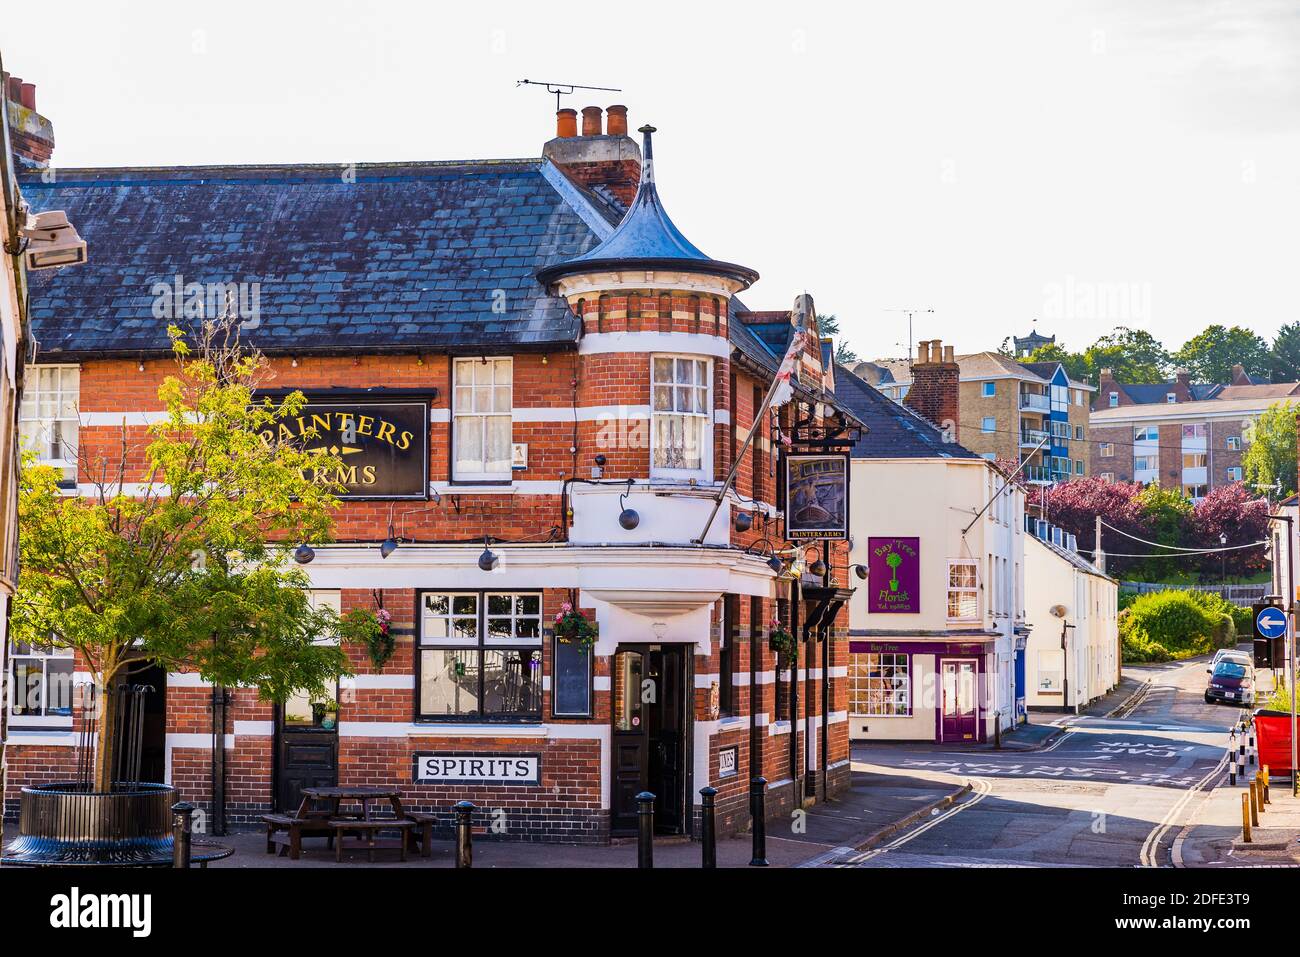 The Painters Arms, Sports Bar, Cross St. Cowes, Isle of Wight, England, United Kingdom, Europe Stock Photo